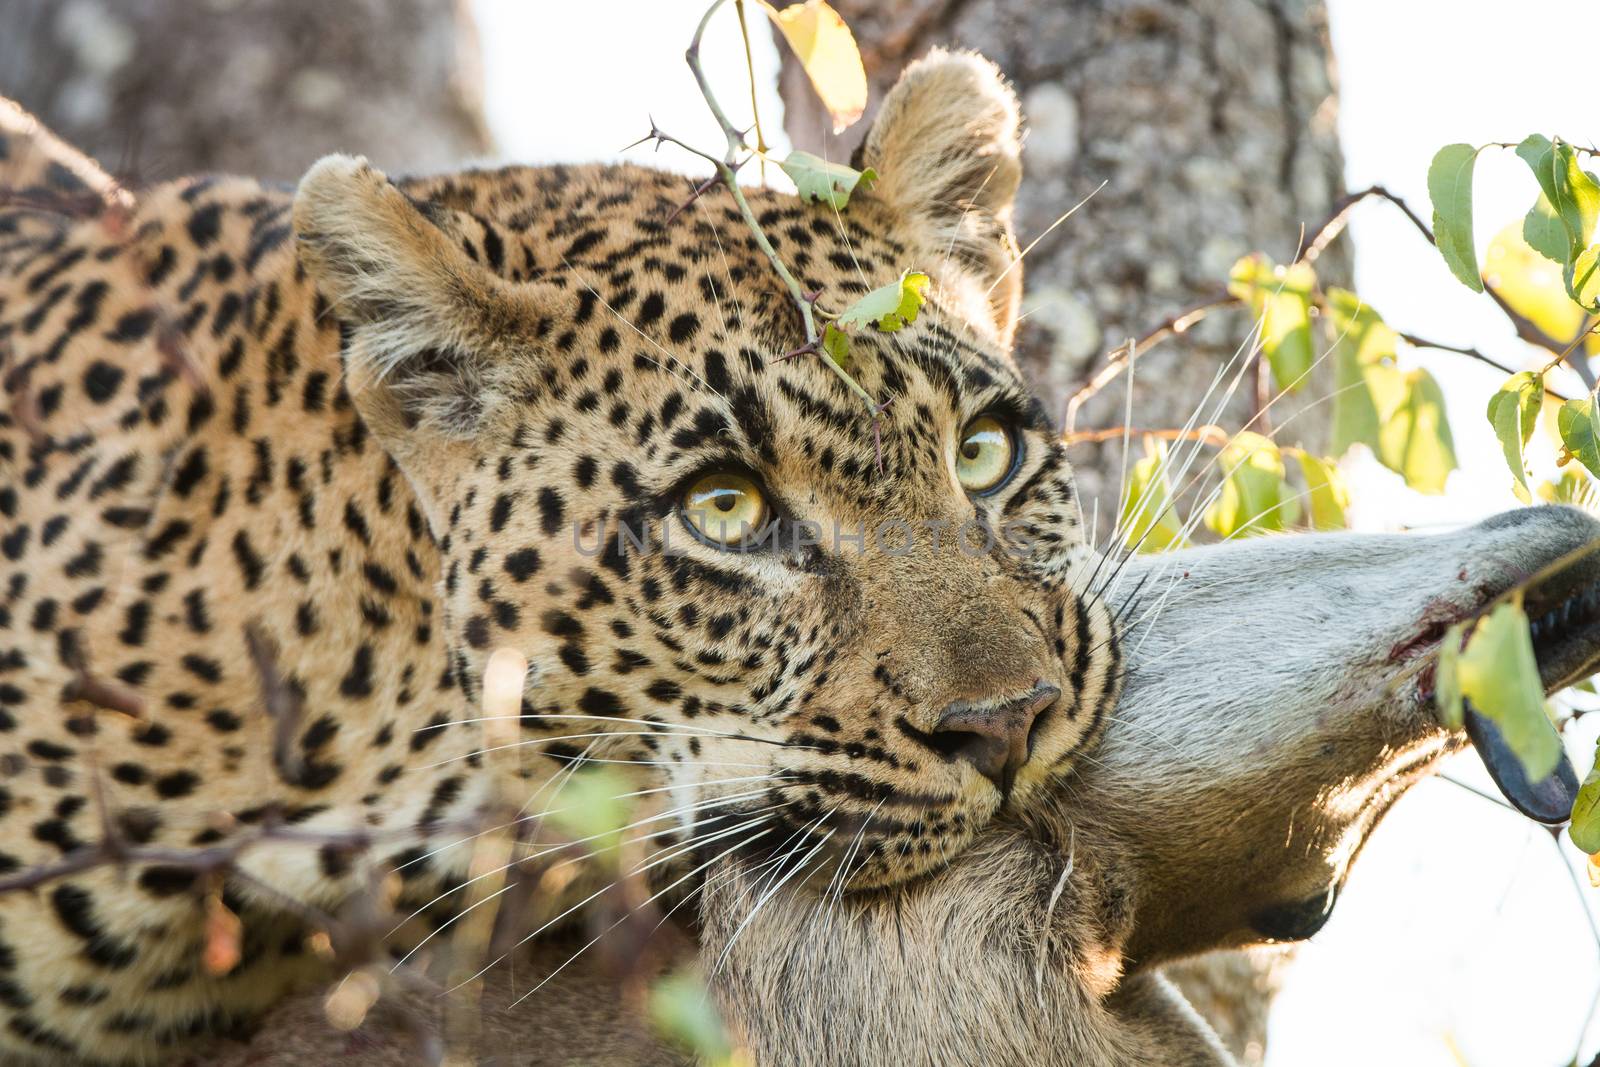 Leopard with a Duiker kill in the Sabi Sands, South Africa.